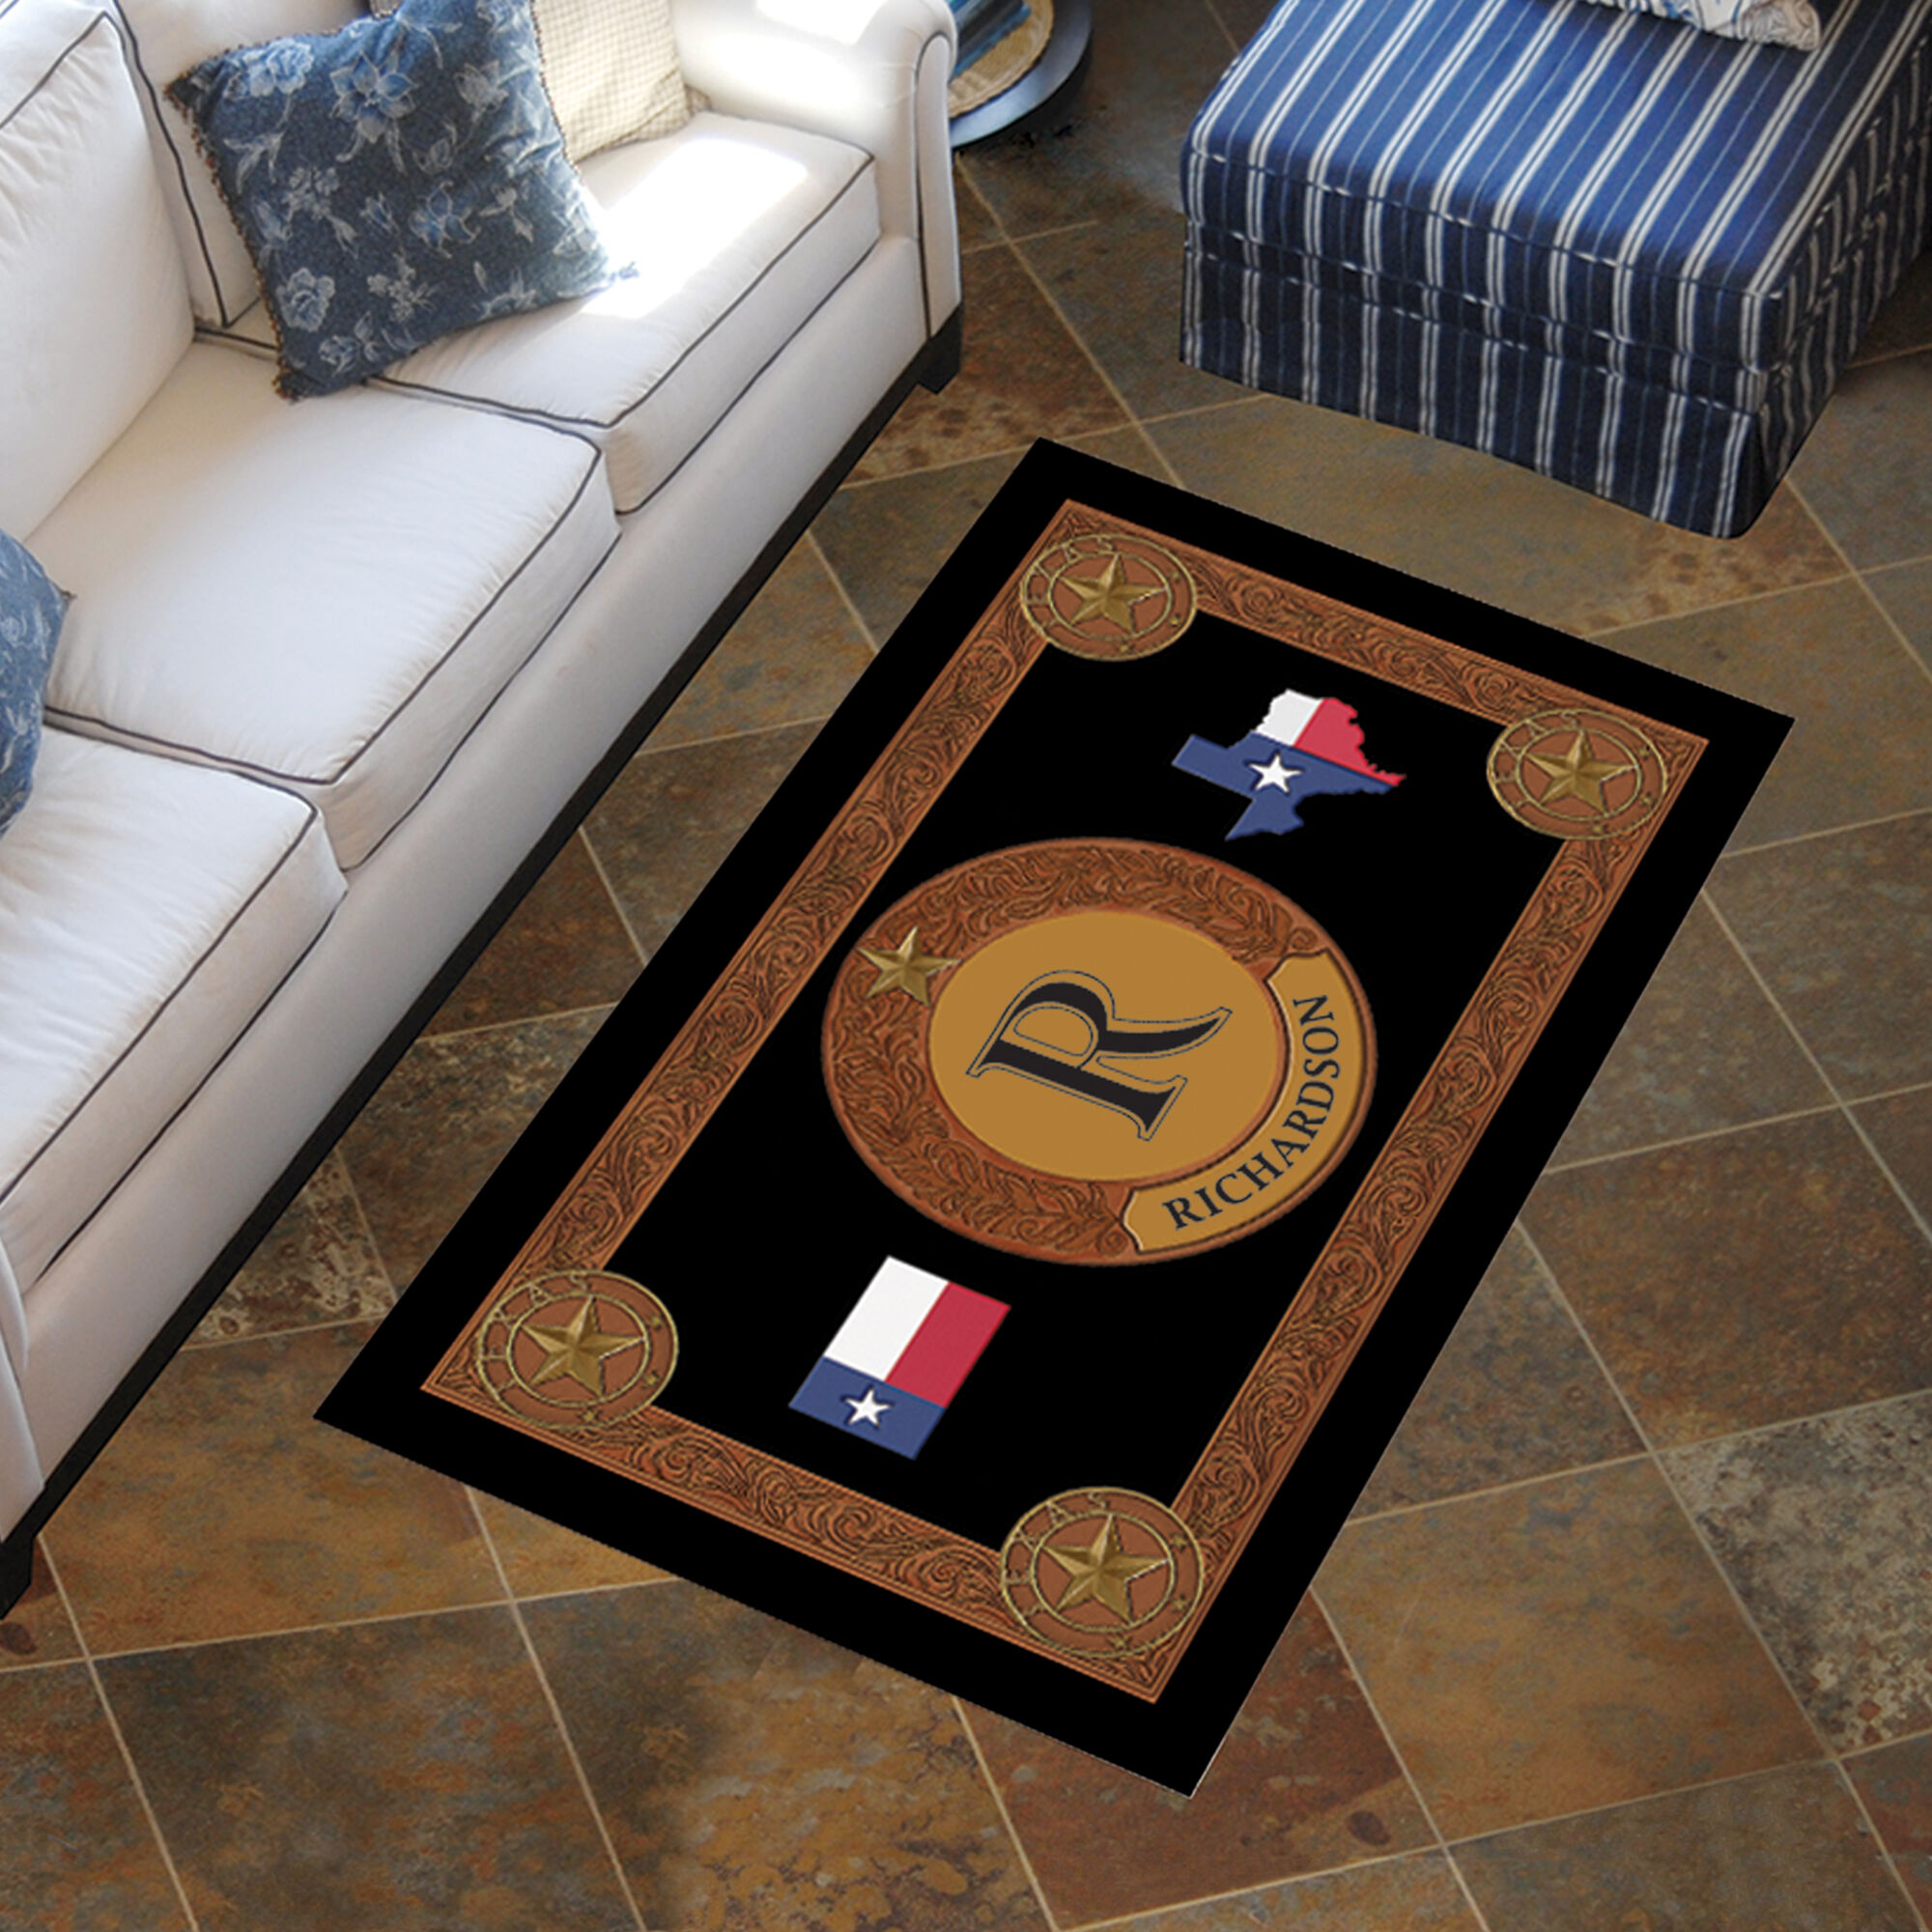 The Personalized Texas Accent Rug 11290 0014 m room